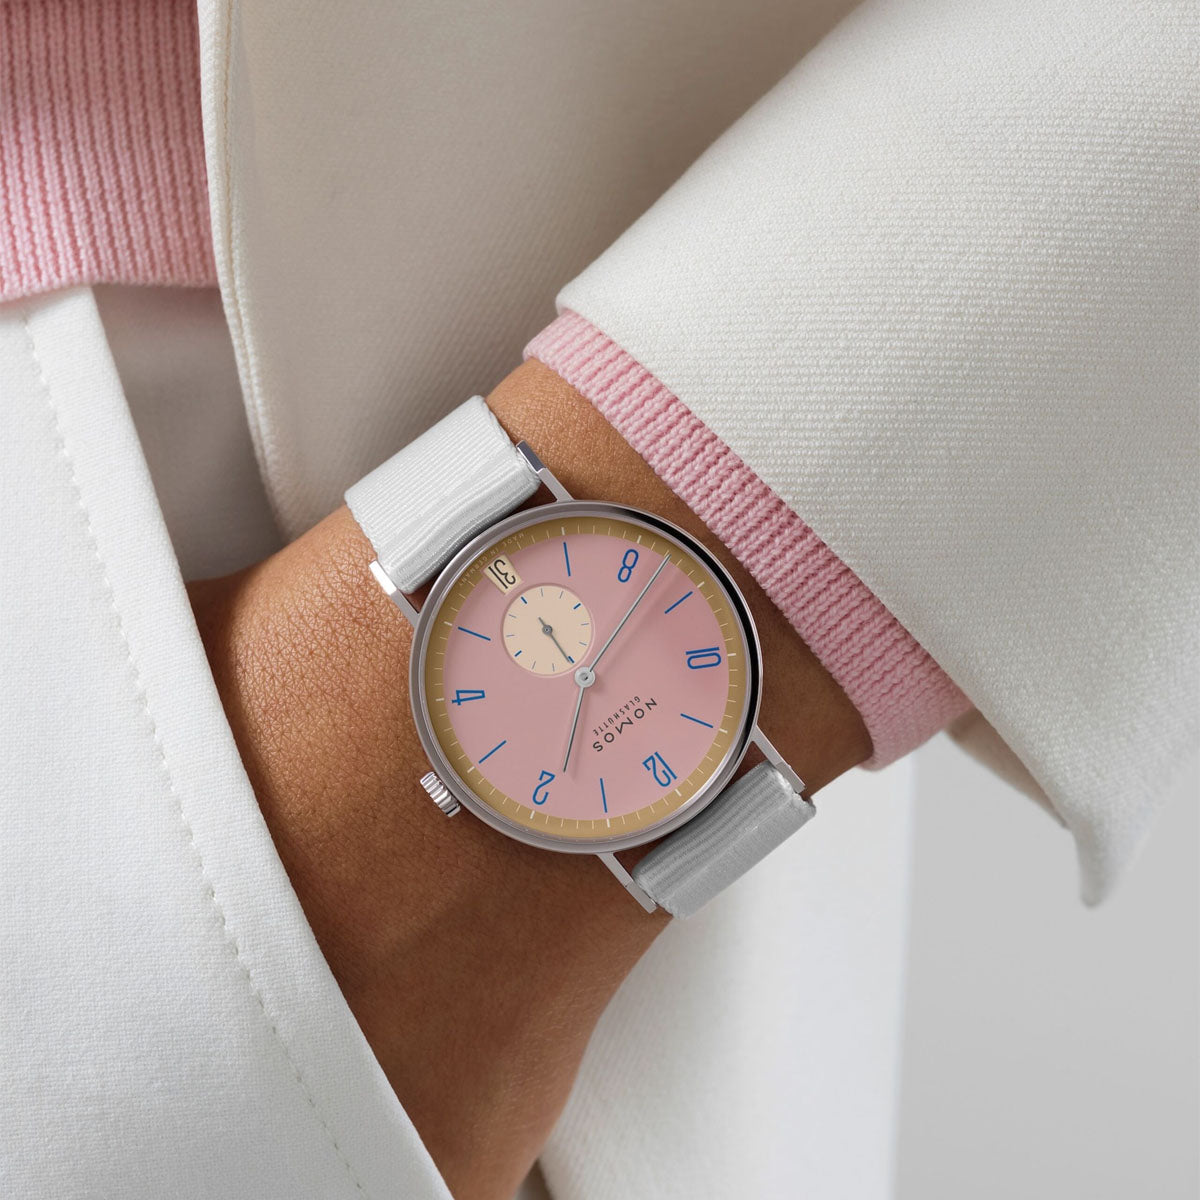 Tangente 38mm 'Pompadour' Limited Edition Watch